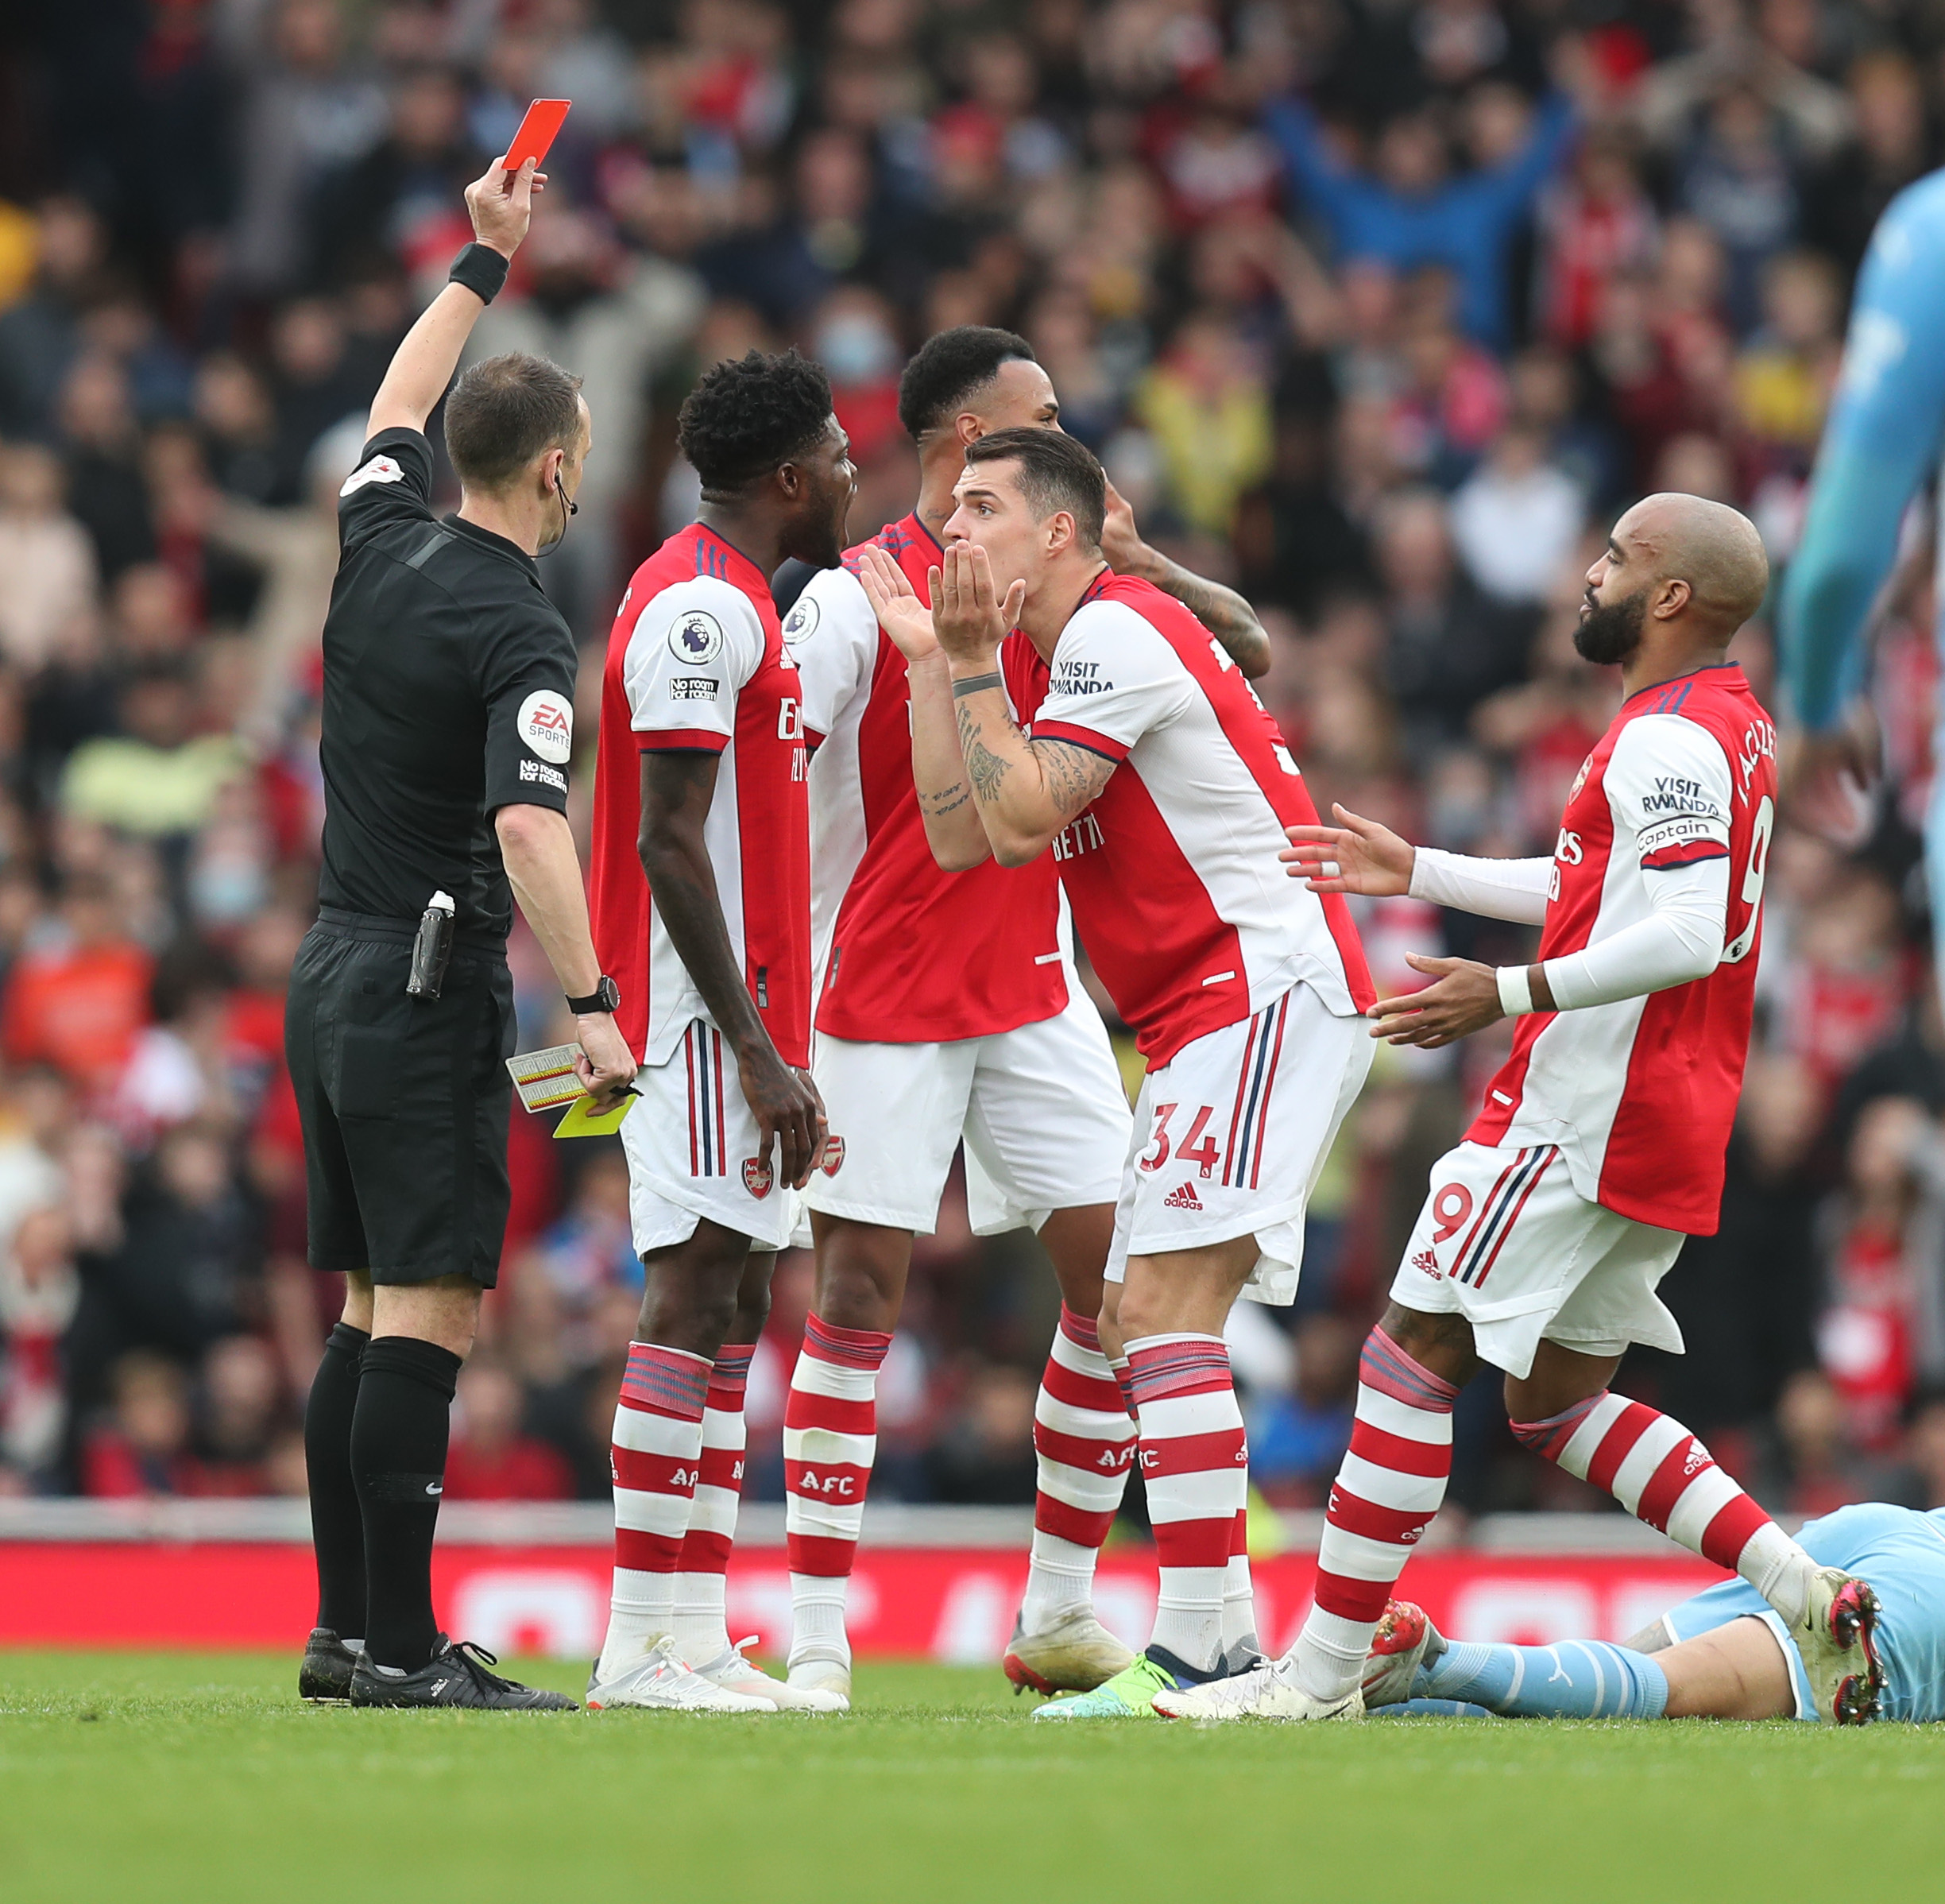 Albert Stuivenberg on Arsenal's 'frustrating' defeat to Manchester City